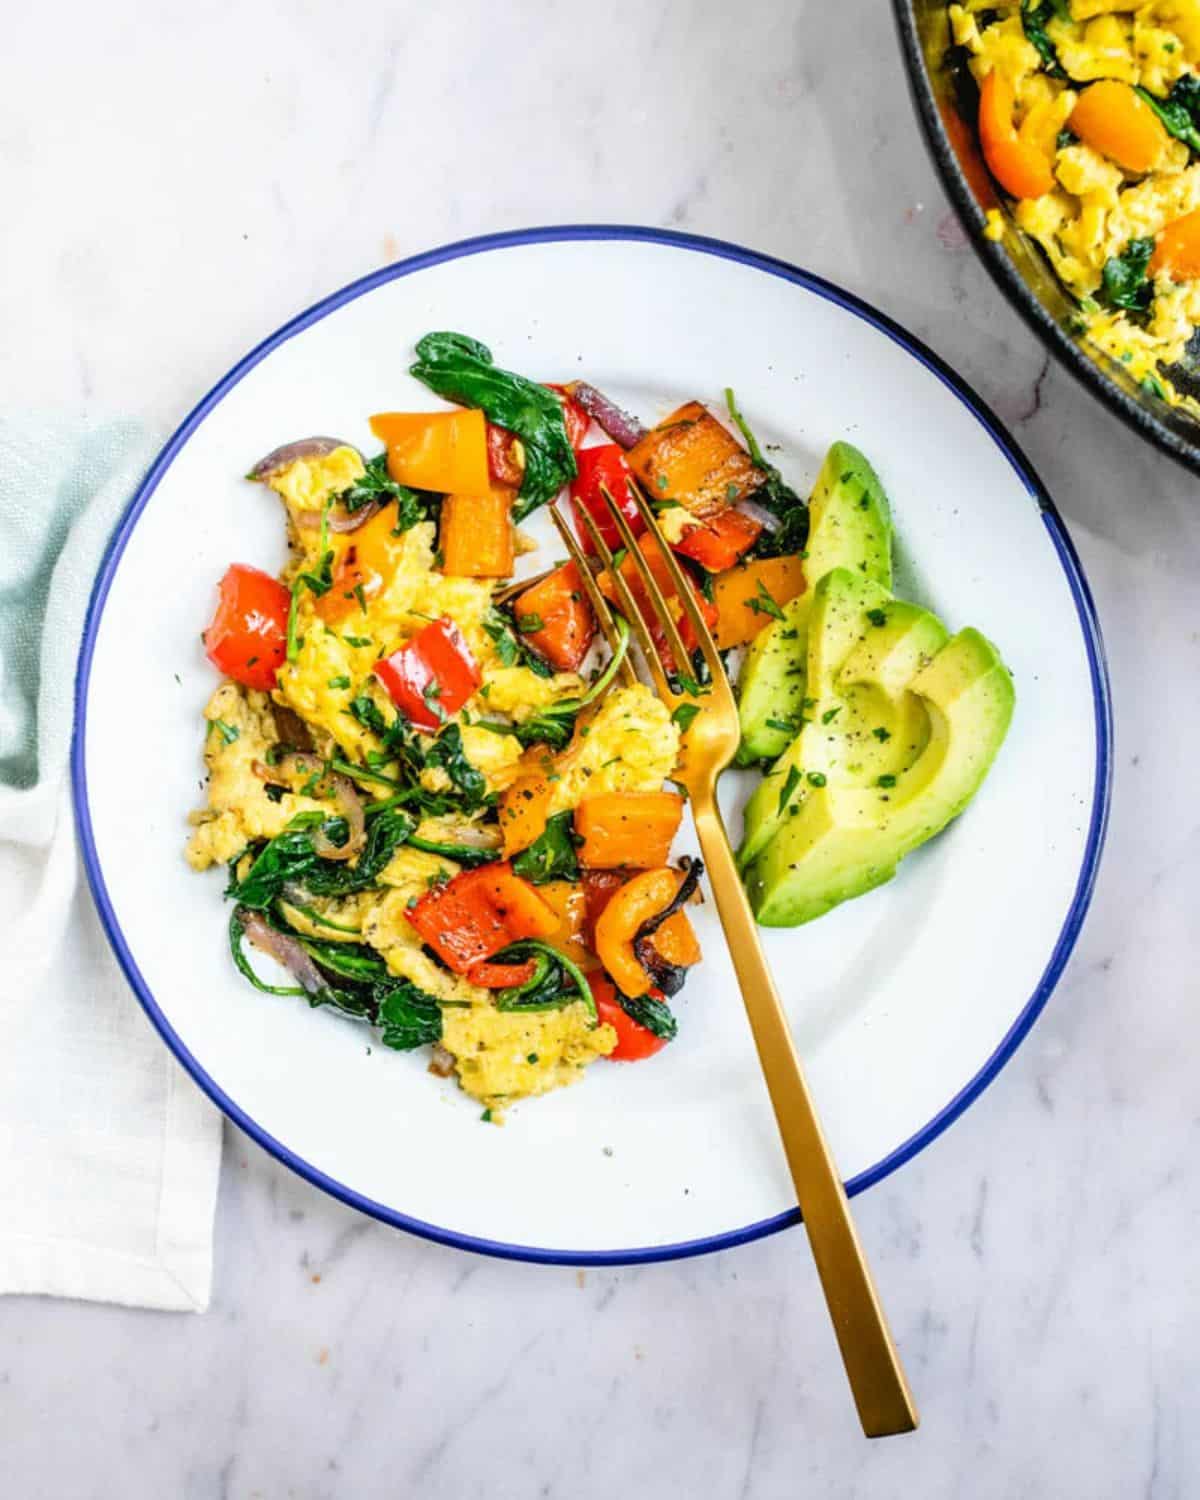 Healthy breakfast vegetable scramble on a palte with a fork.